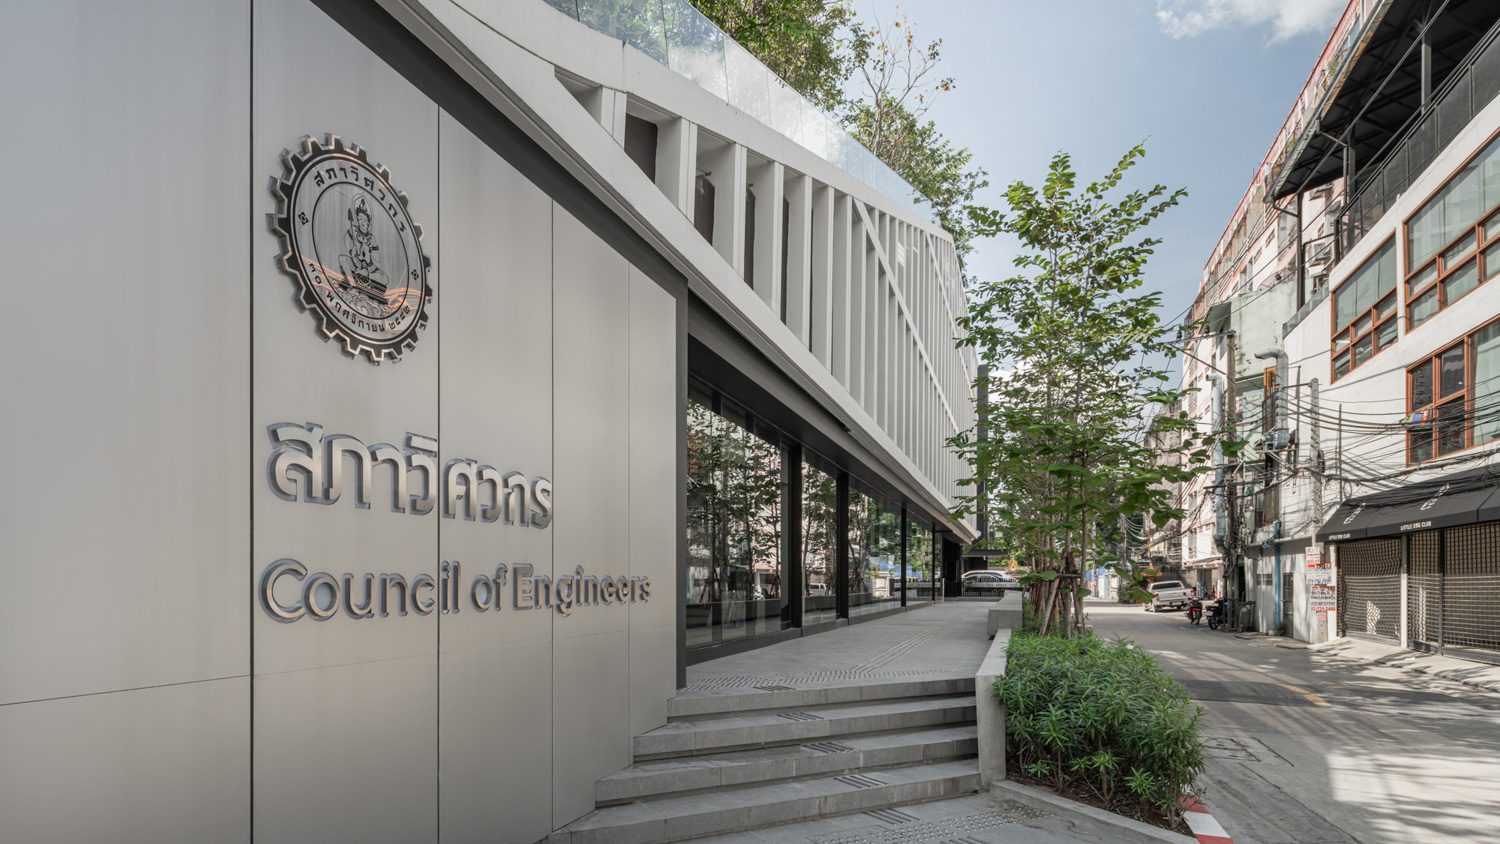 Council of Engineers Thailand